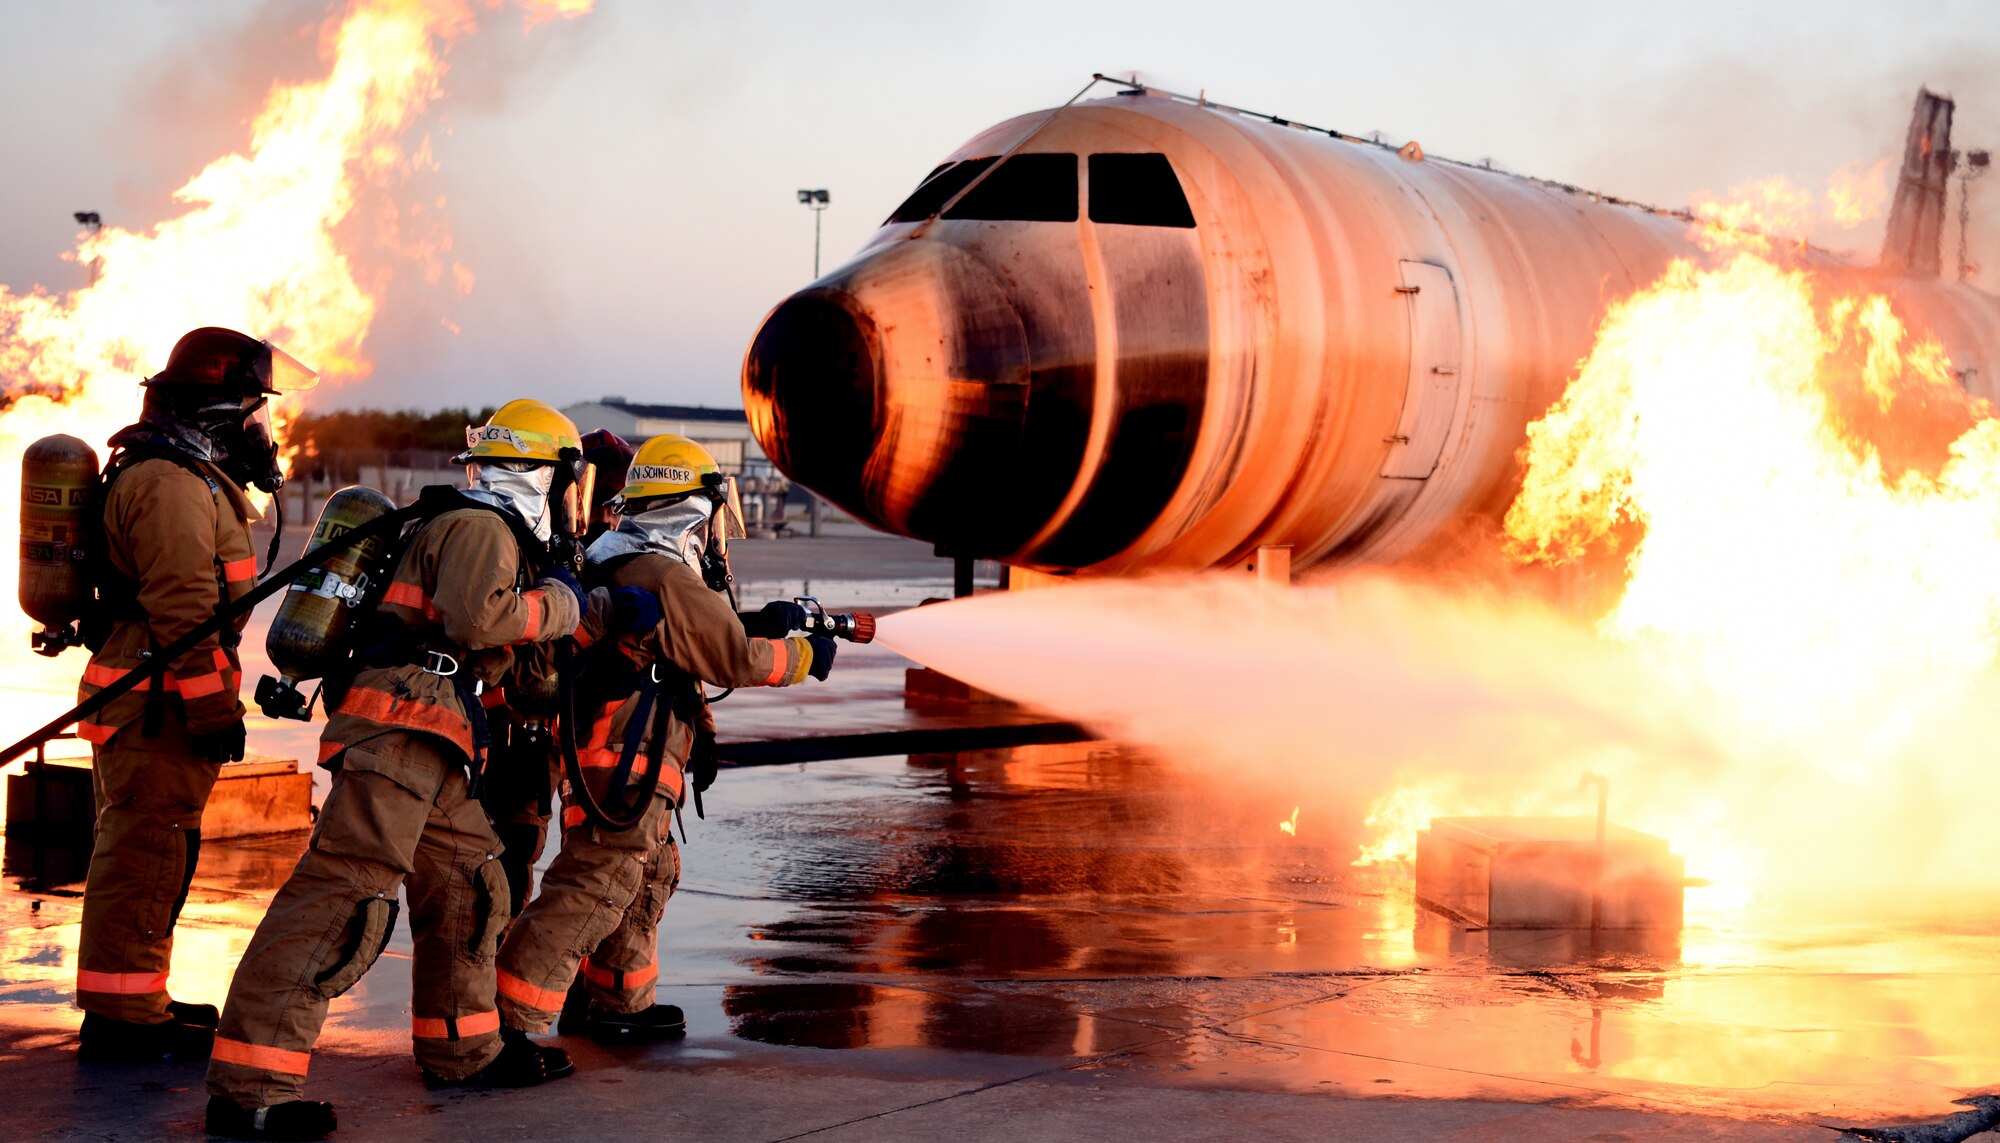 Airman approaches an exterior aircraft fire with water hose